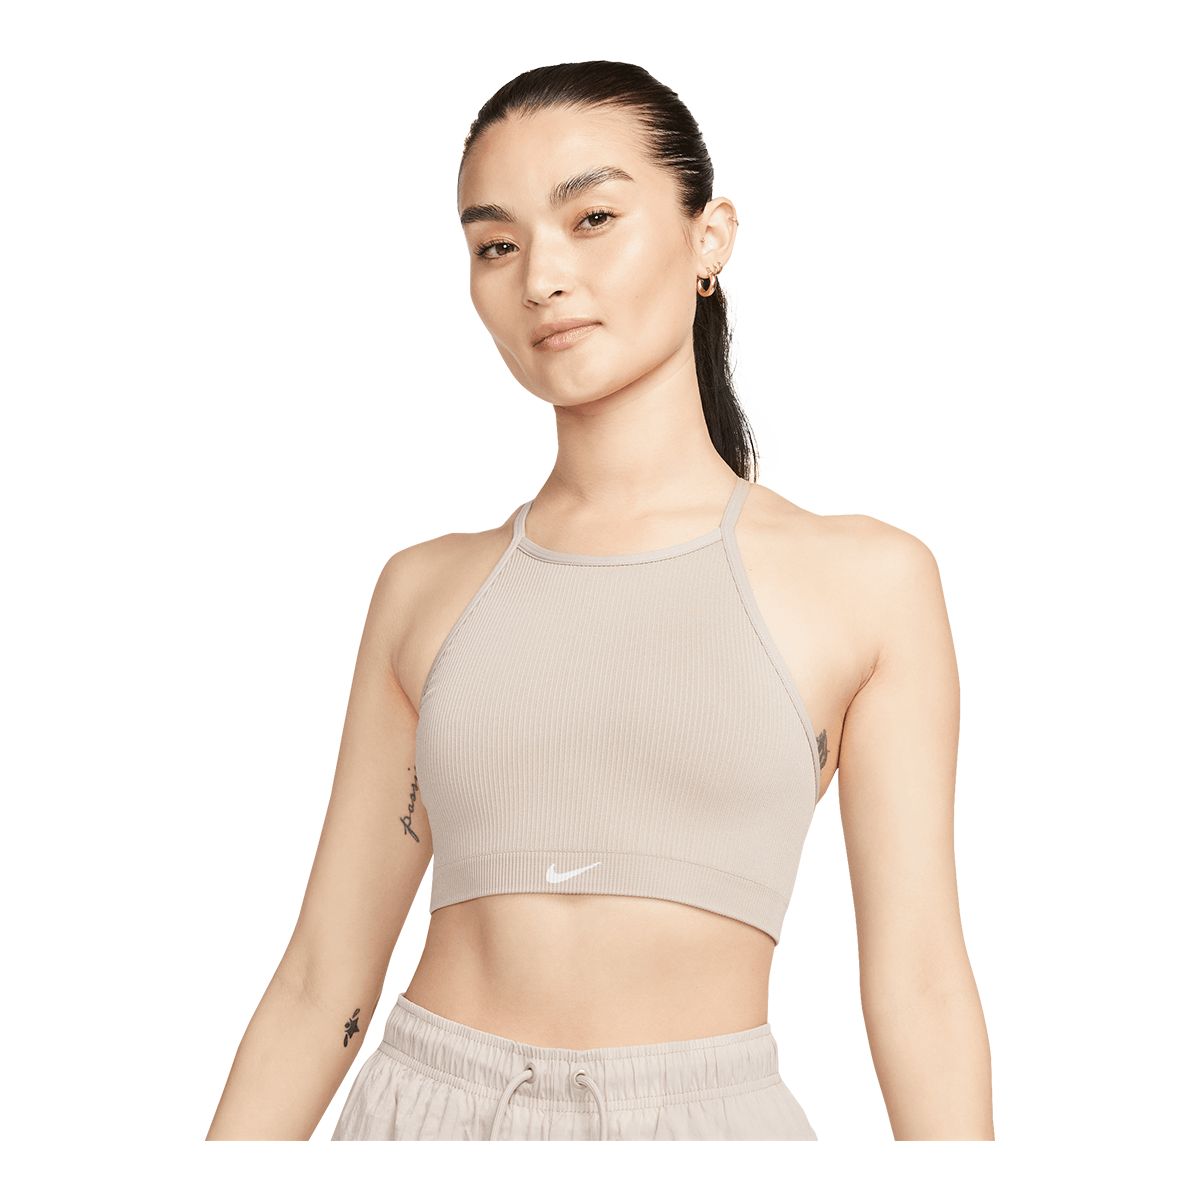 https://media-www.sportchek.ca/product/div-03-softgoods/dpt-70-athletic-clothing/sdpt-02-womens/334079340/nike-w-df-indy-smls-rib-bra-low-241d39f8-29e8-433d-ad4a-34e23dffe275-jpgrendition.jpg